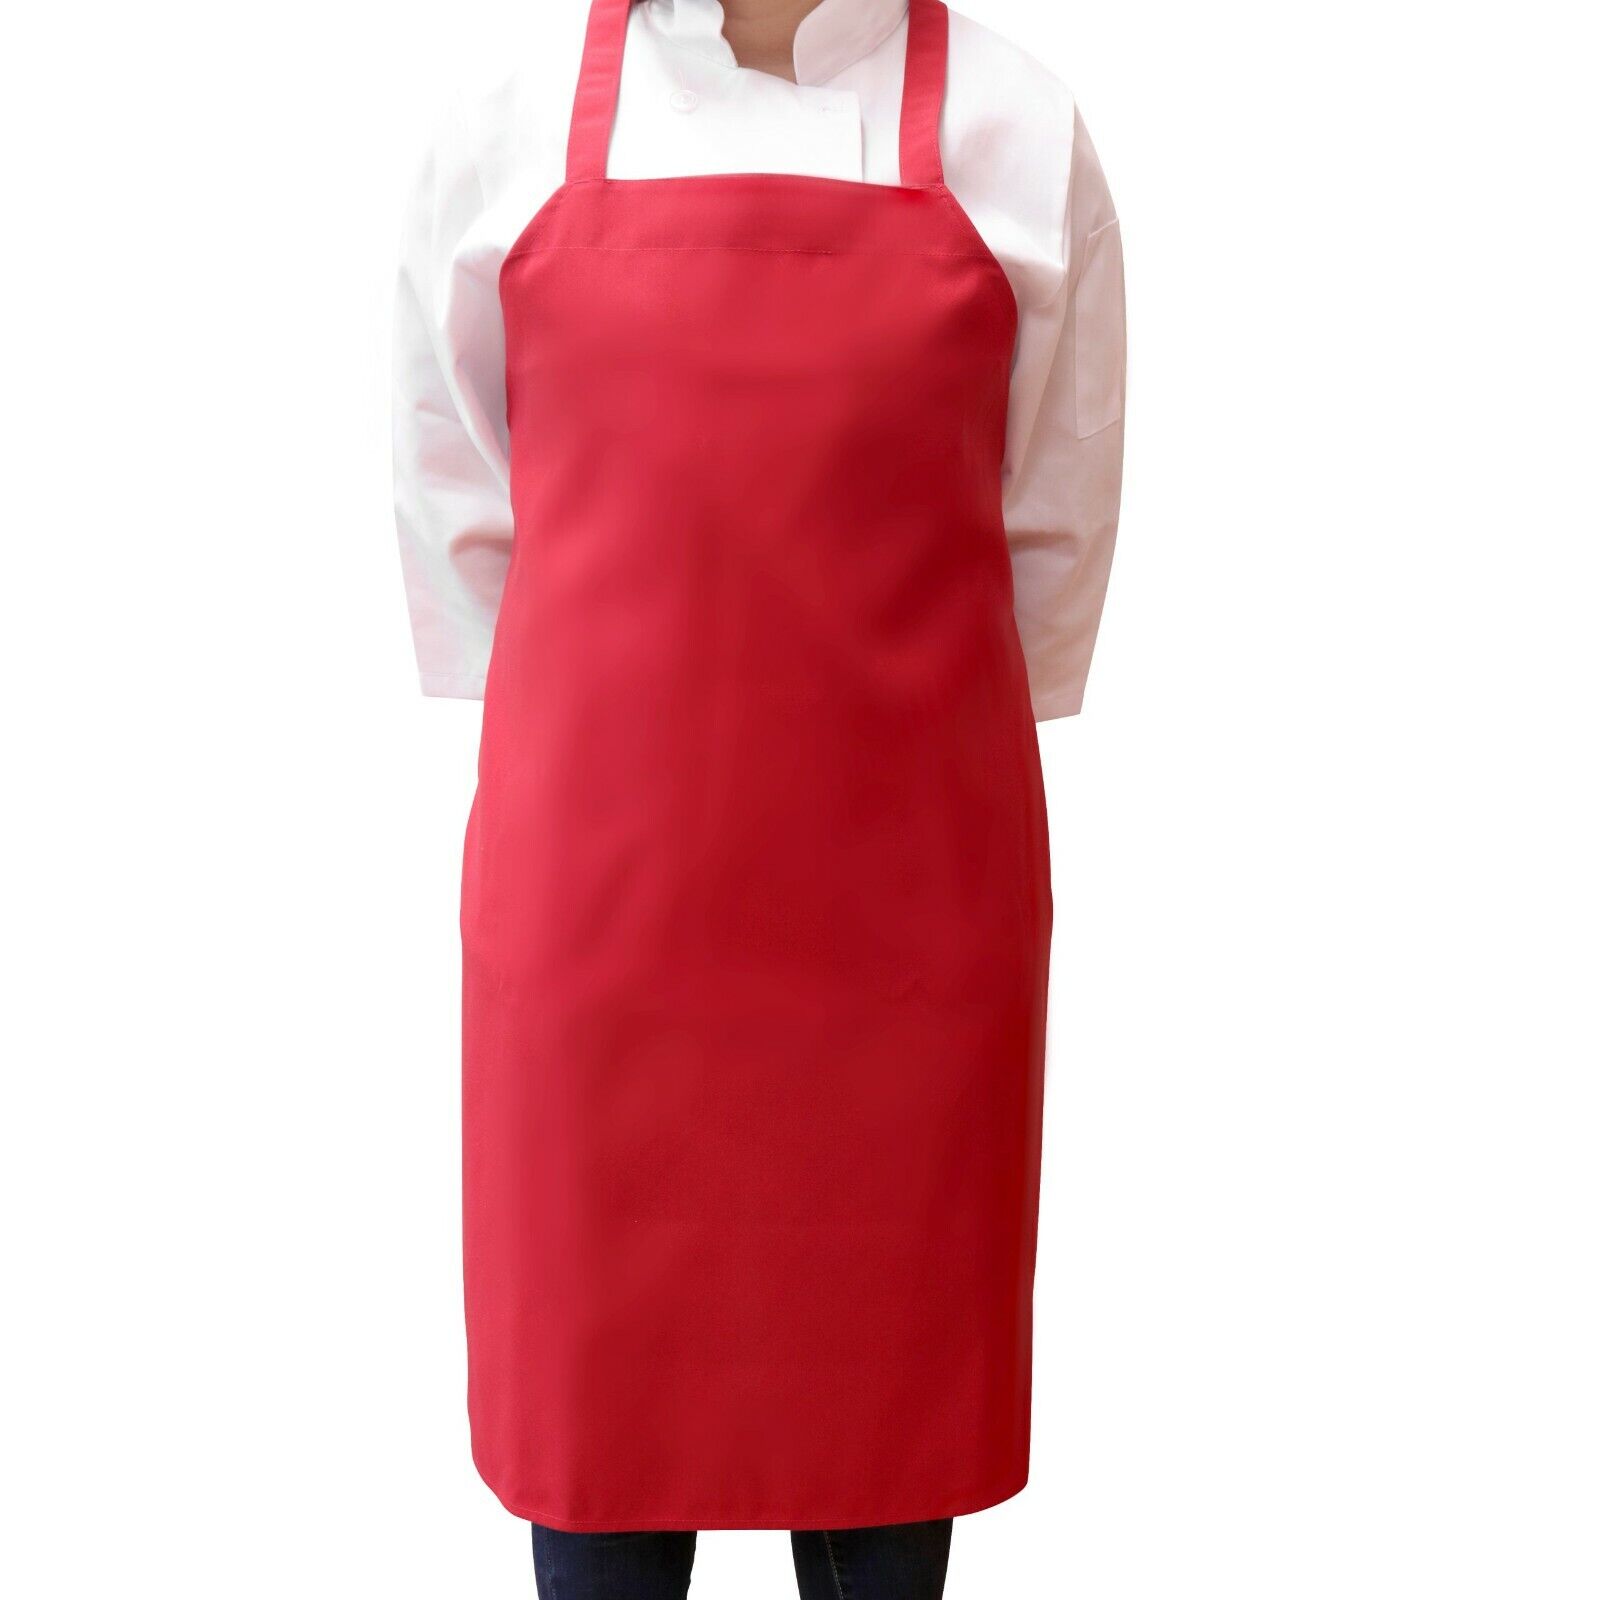 12 Pack of Kitchen Aprons - Full Bib Size Polyester Apron - Black Red or White Arkwright Does Not Apply - фотография #12